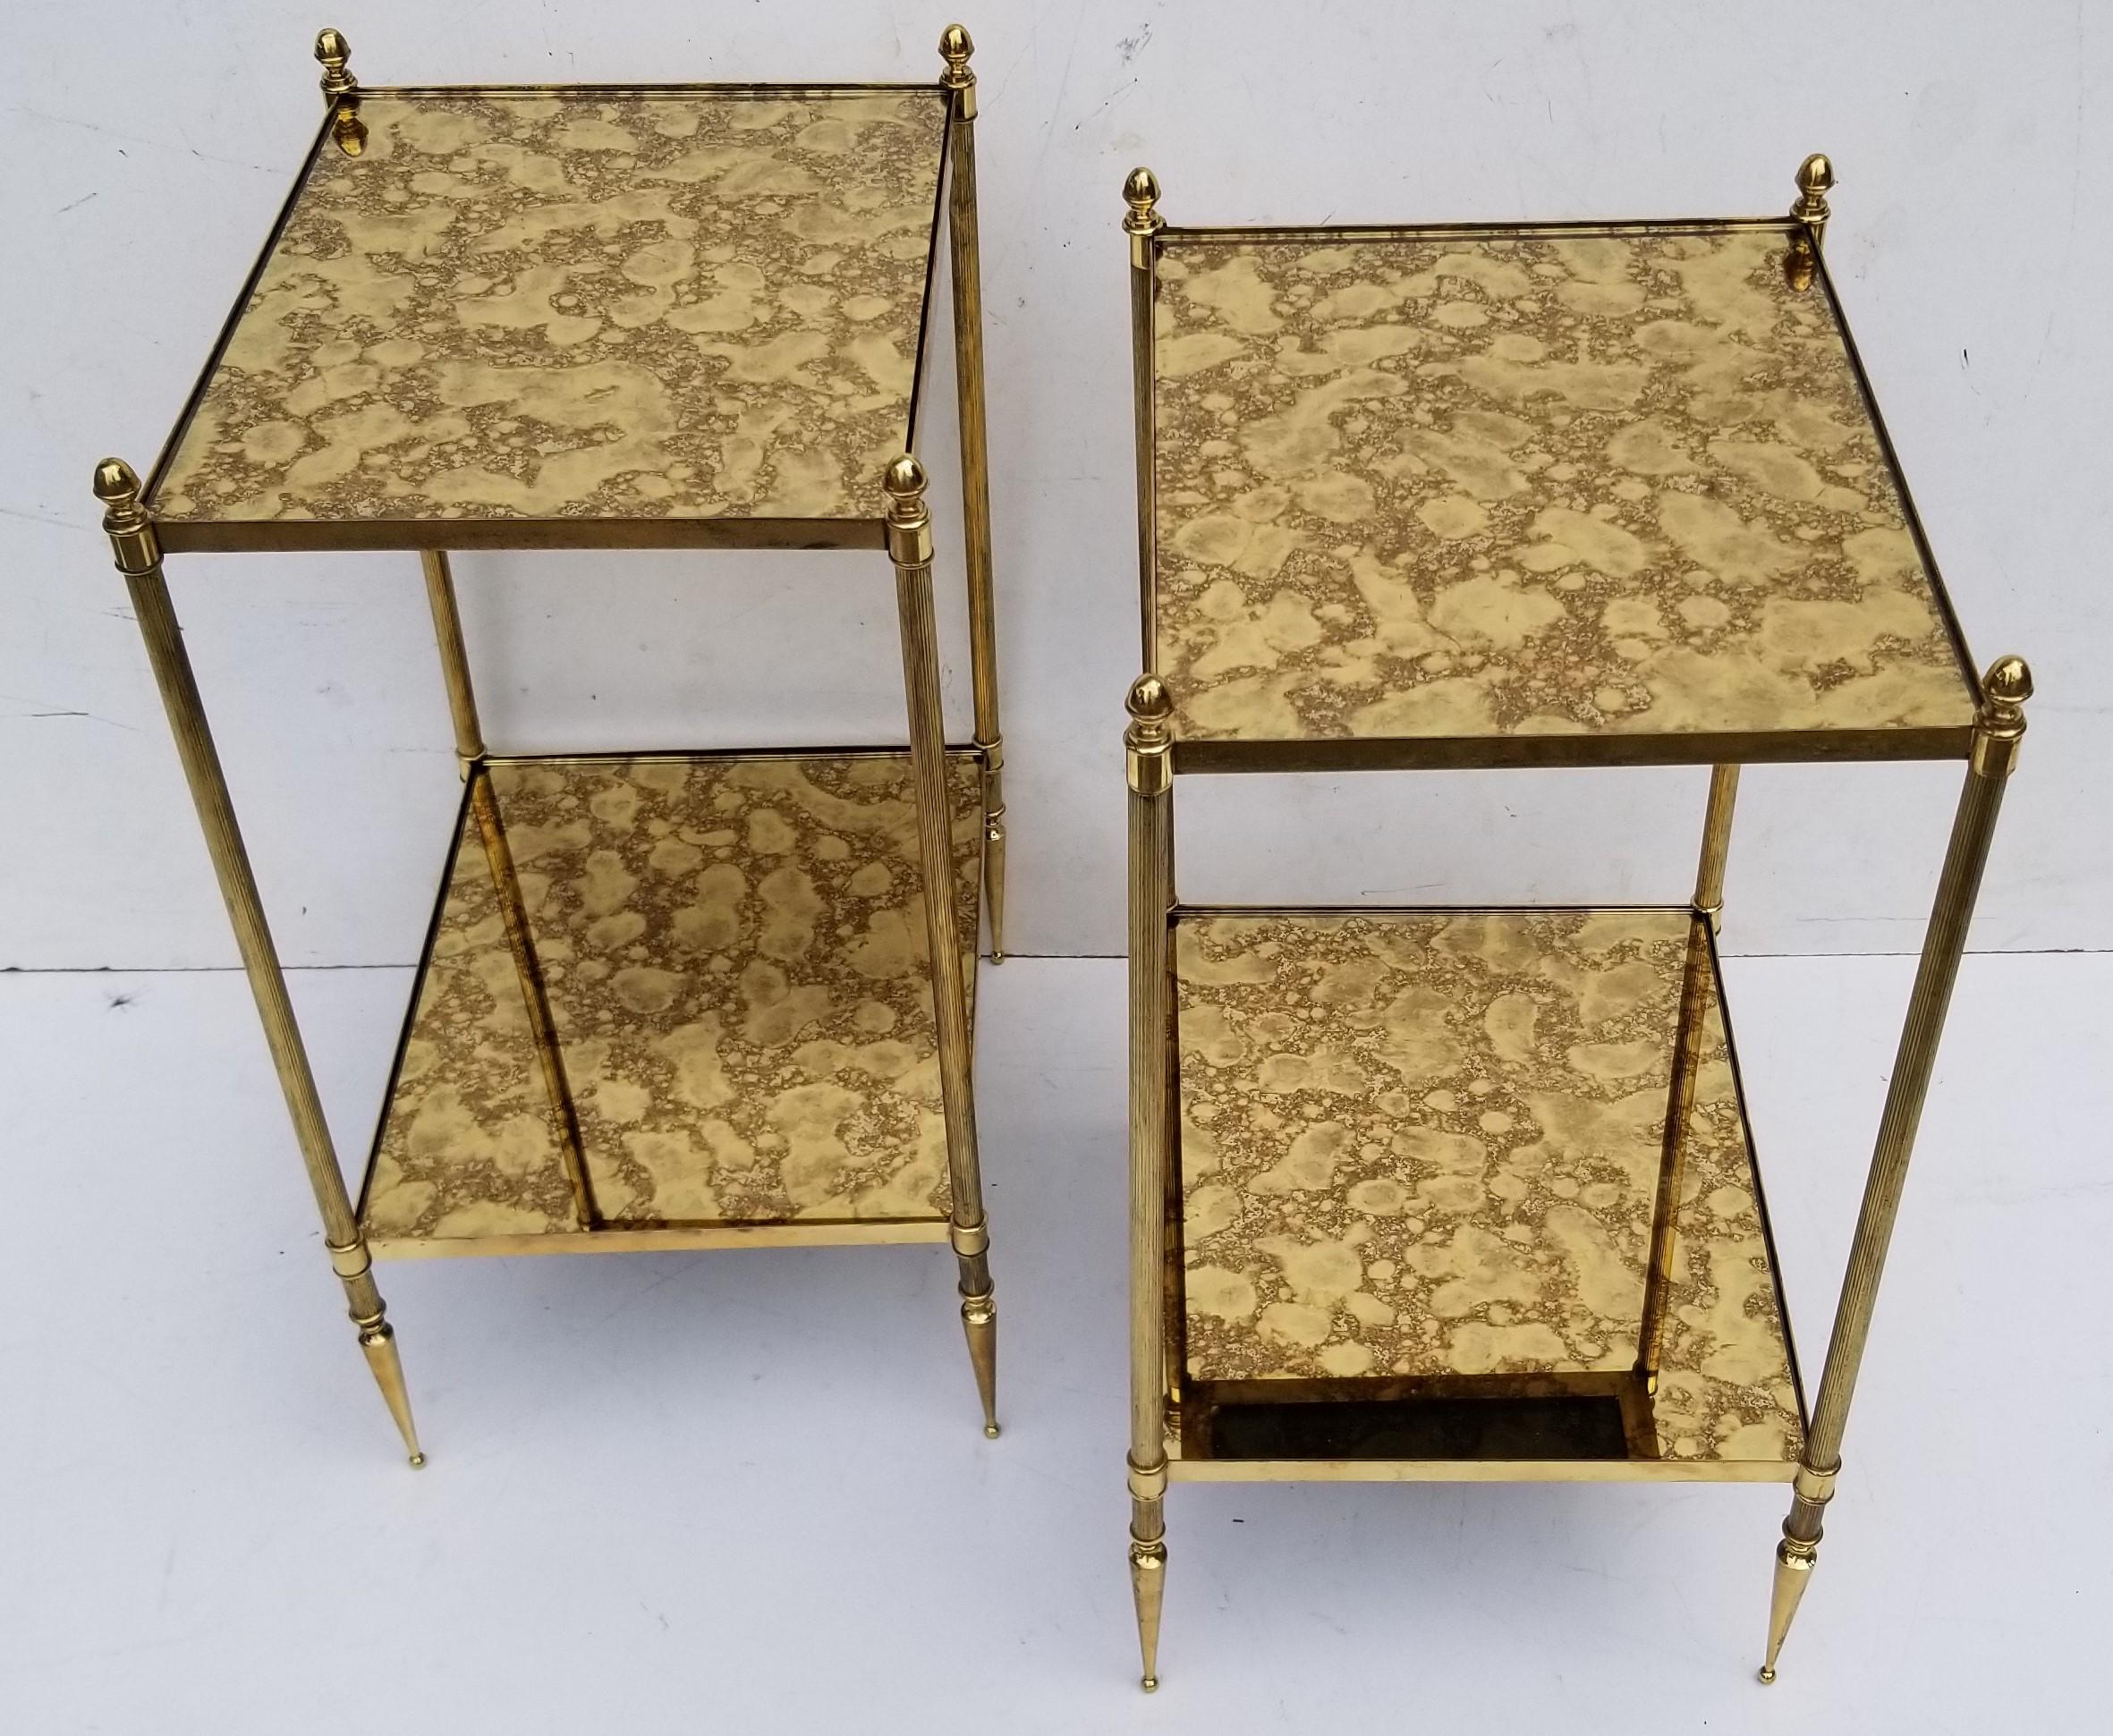 Pair of Maison Baguès French neoclassical side tables.
2-tier brass, bronze and gold cloudy mirrors.
     